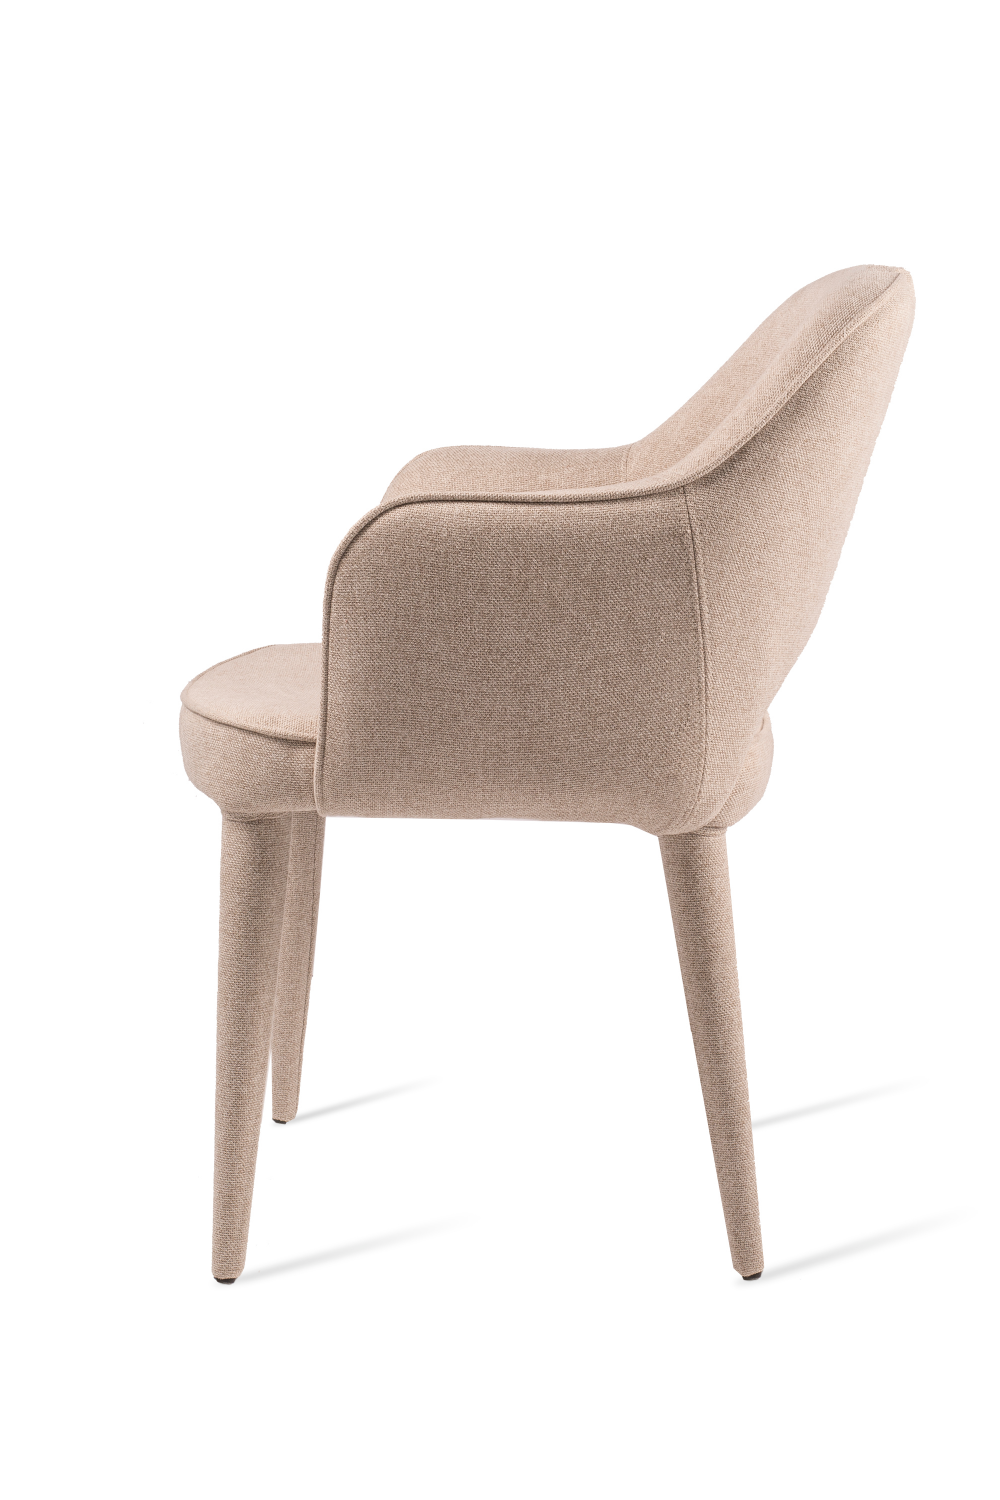 Pols Potten Hand chair - The Design Lover